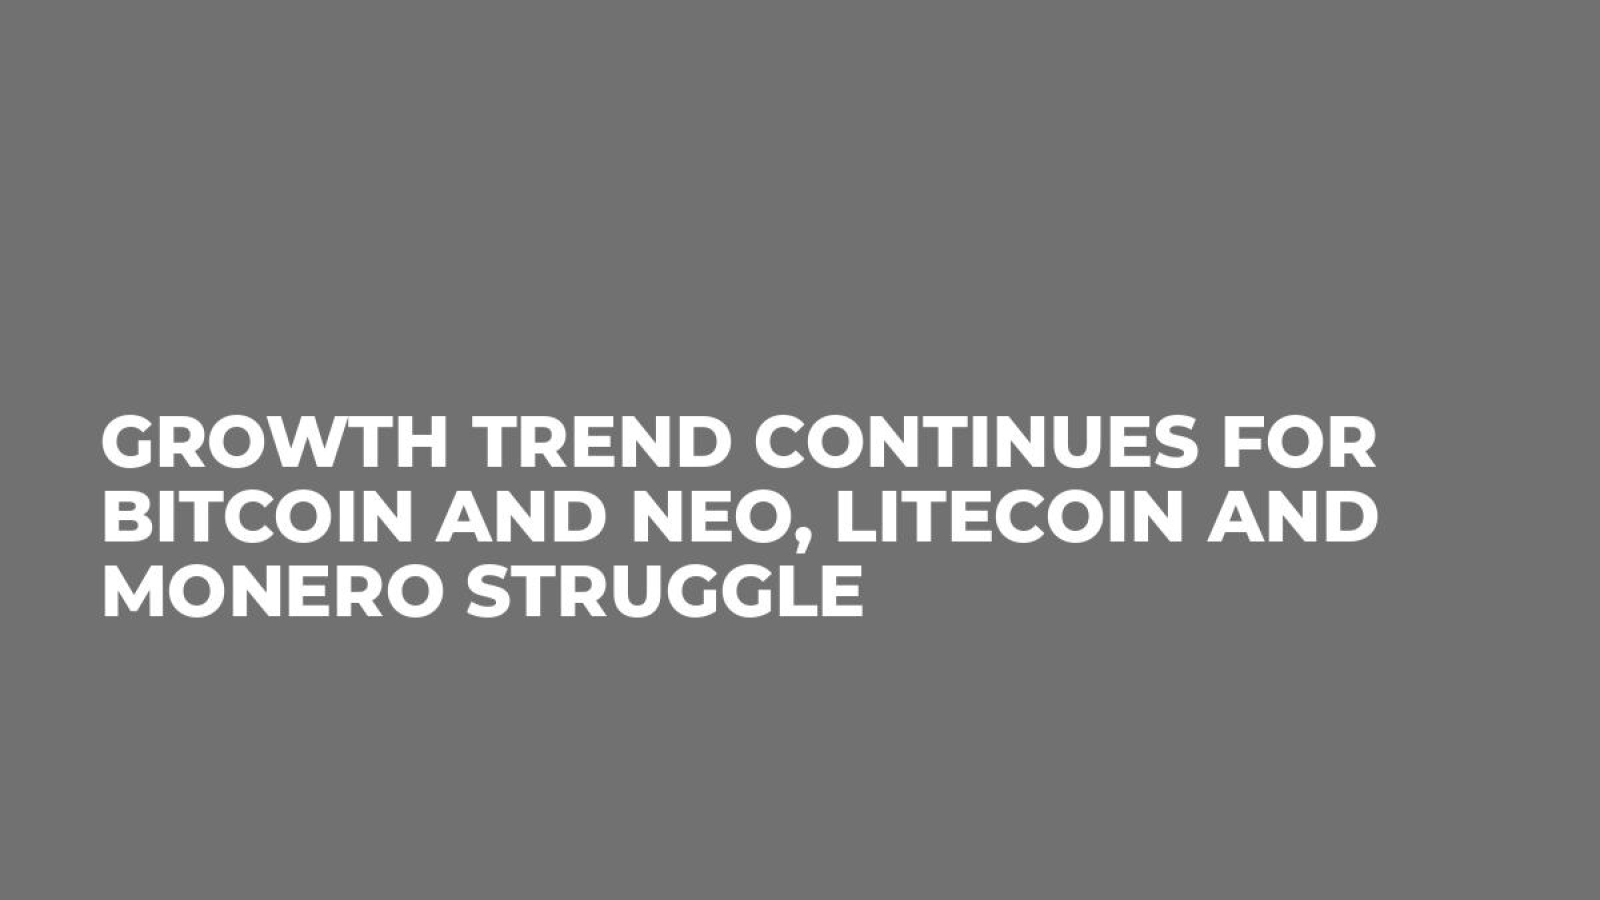 Growth Trend Continues For Bitcoin and NEO, Litecoin and Monero Struggle